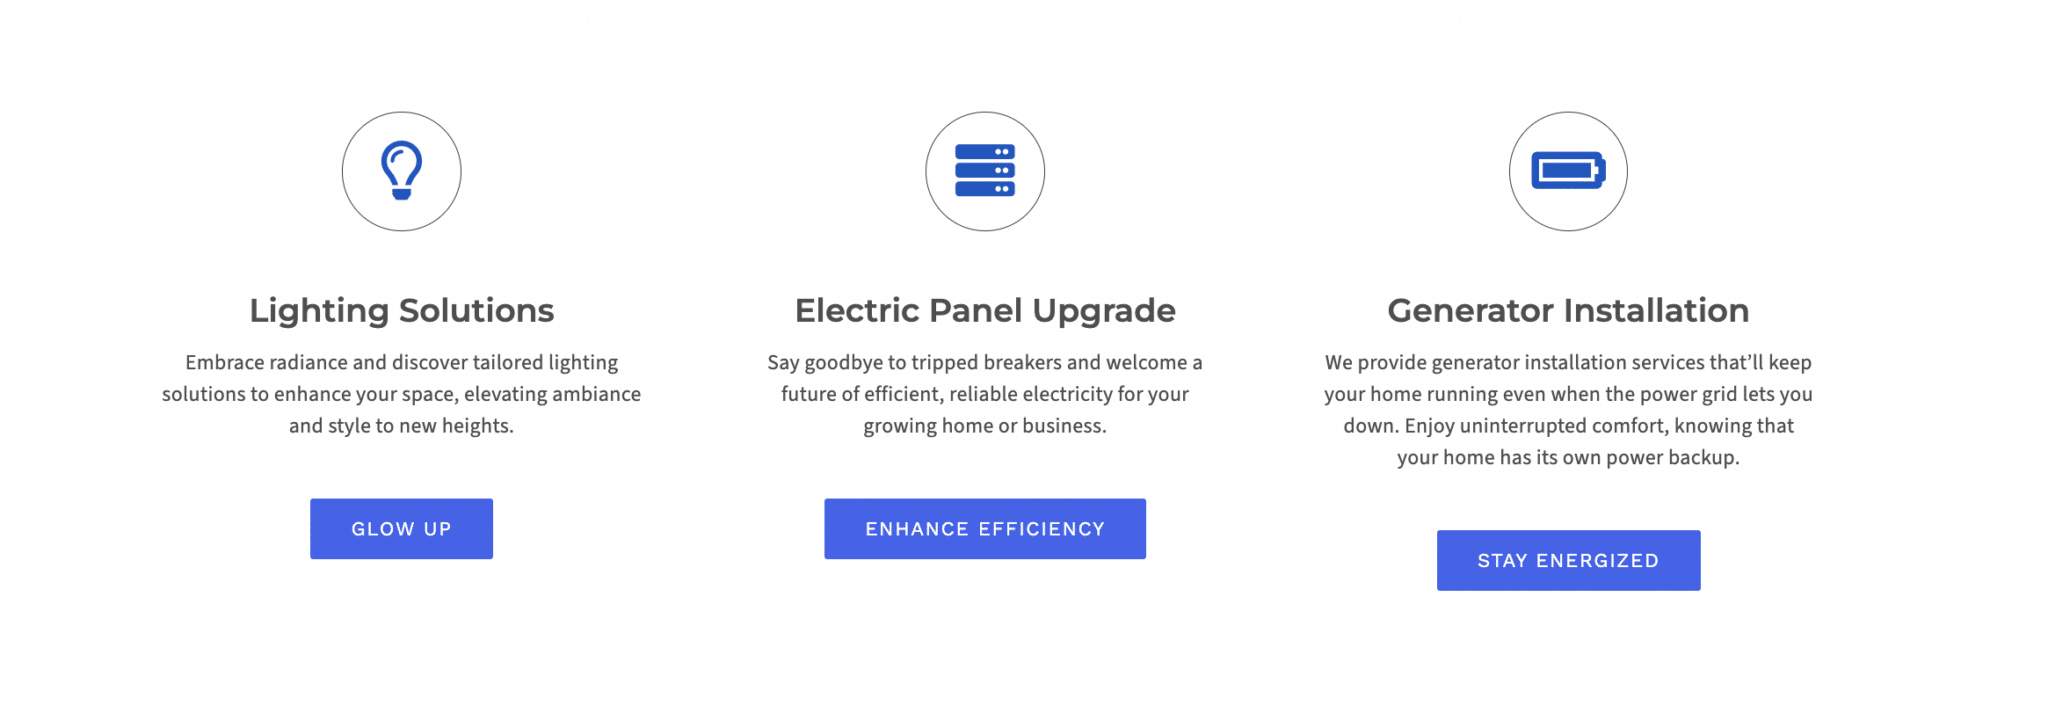 All About Electrical blue and white icons with service content on their website with a white background.